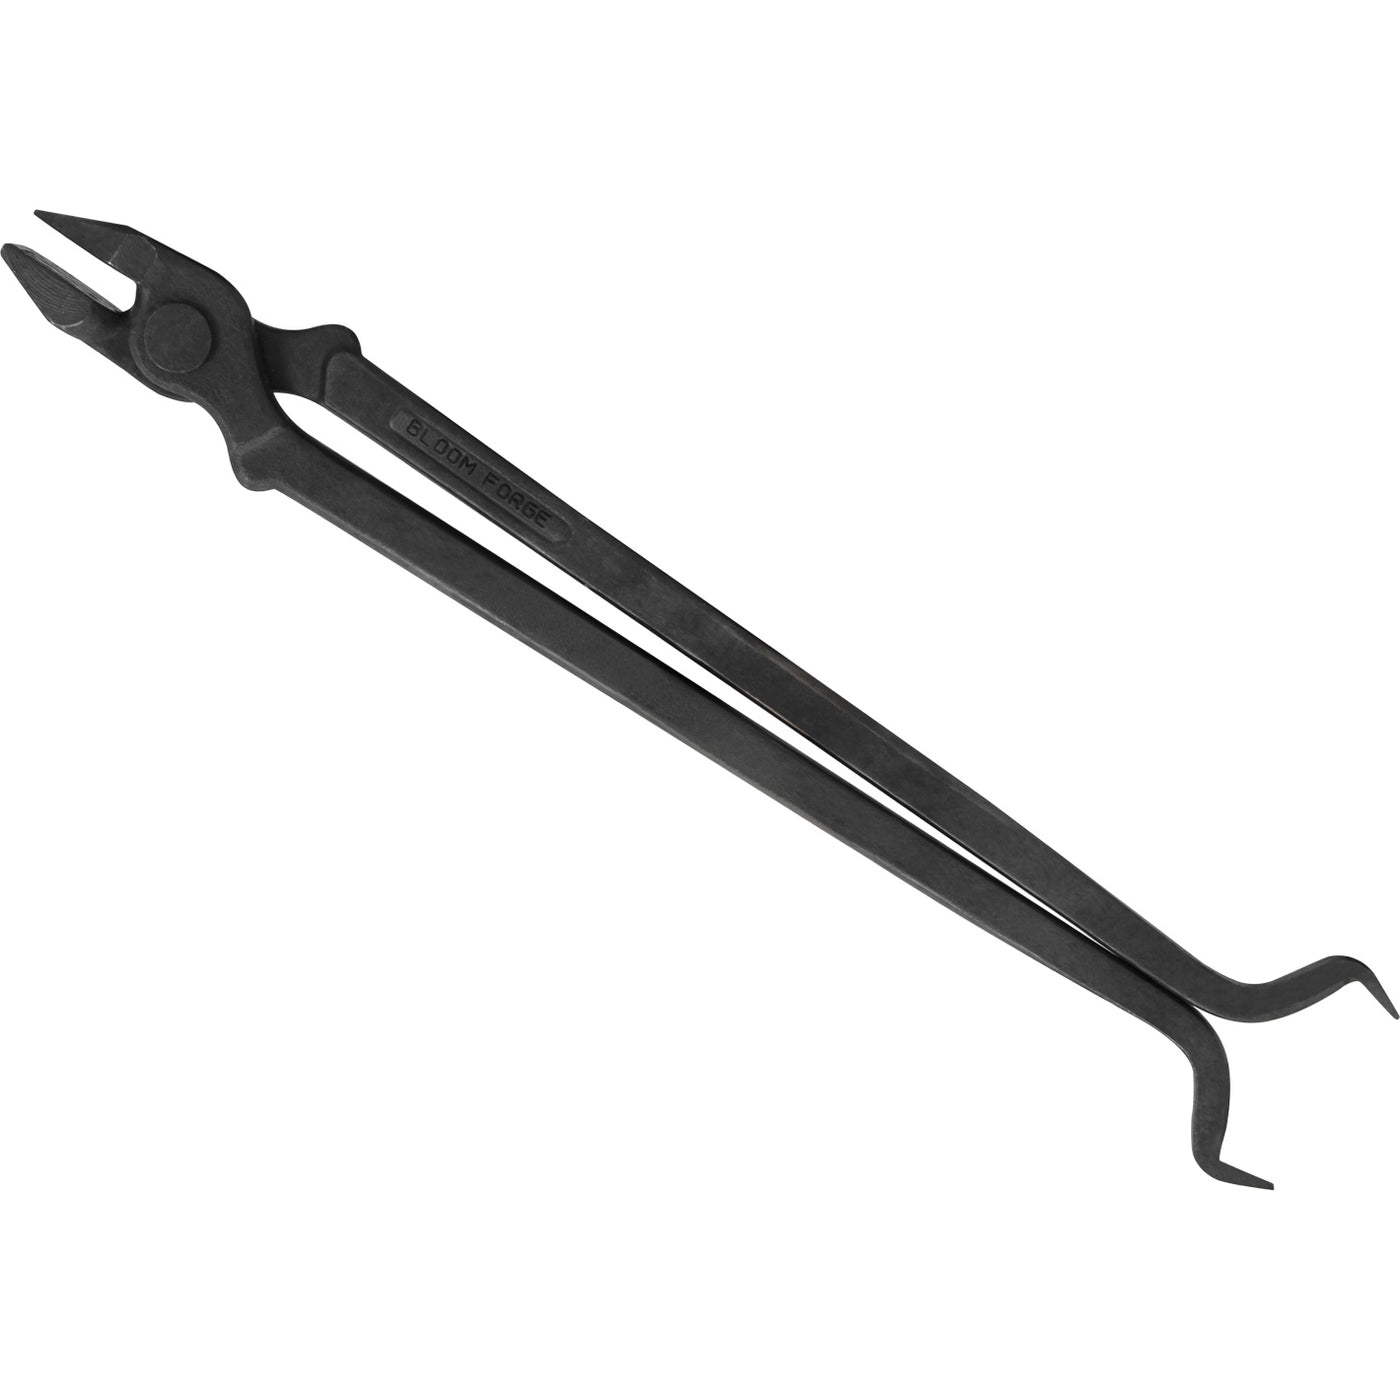 Bloom Forge Hot Fit Tongs